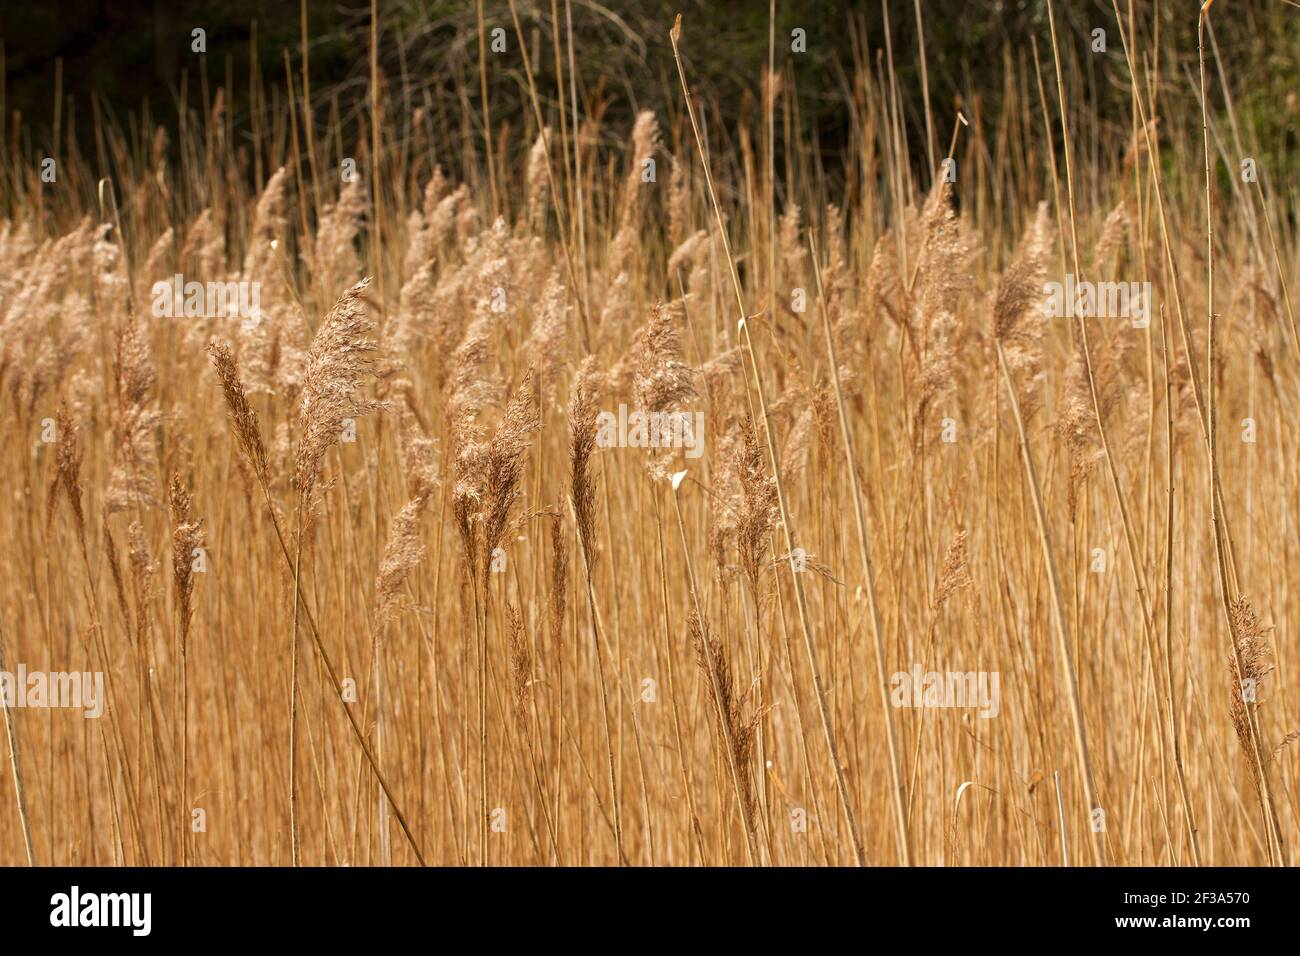 Tallest of the British grass species, the Common Reed spreads using tough creeping rhizomes and stolon's to form dense stands of reed-beds in wetlands Stock Photo